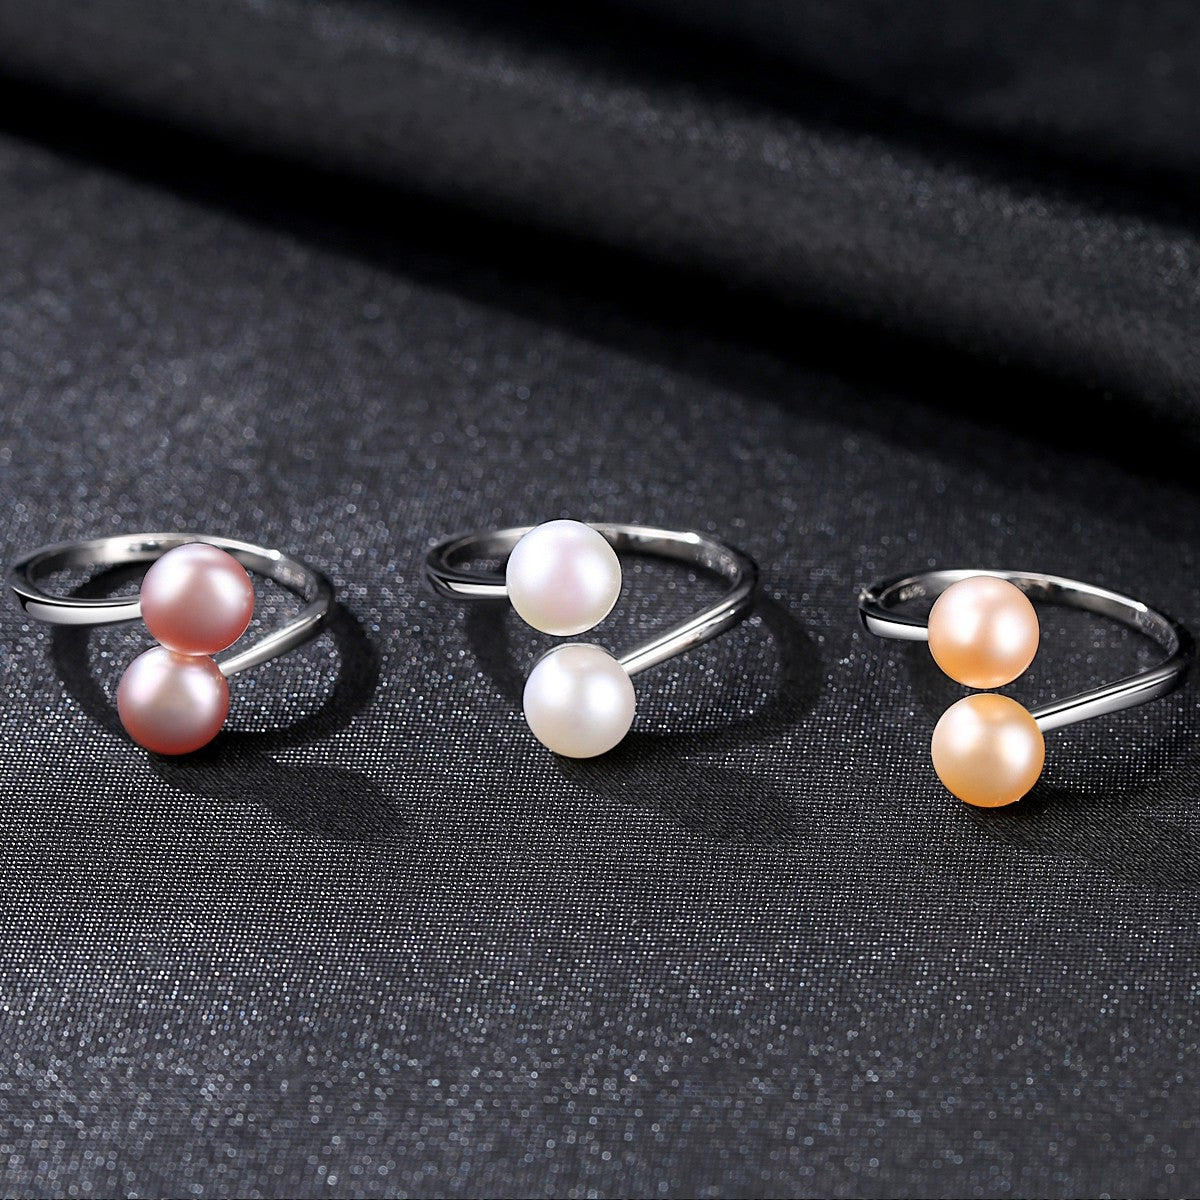 Natural Pearl Ring,Valentine's Gift,Rings for Girls,925 Silver,All Size 3  to 14 | eBay